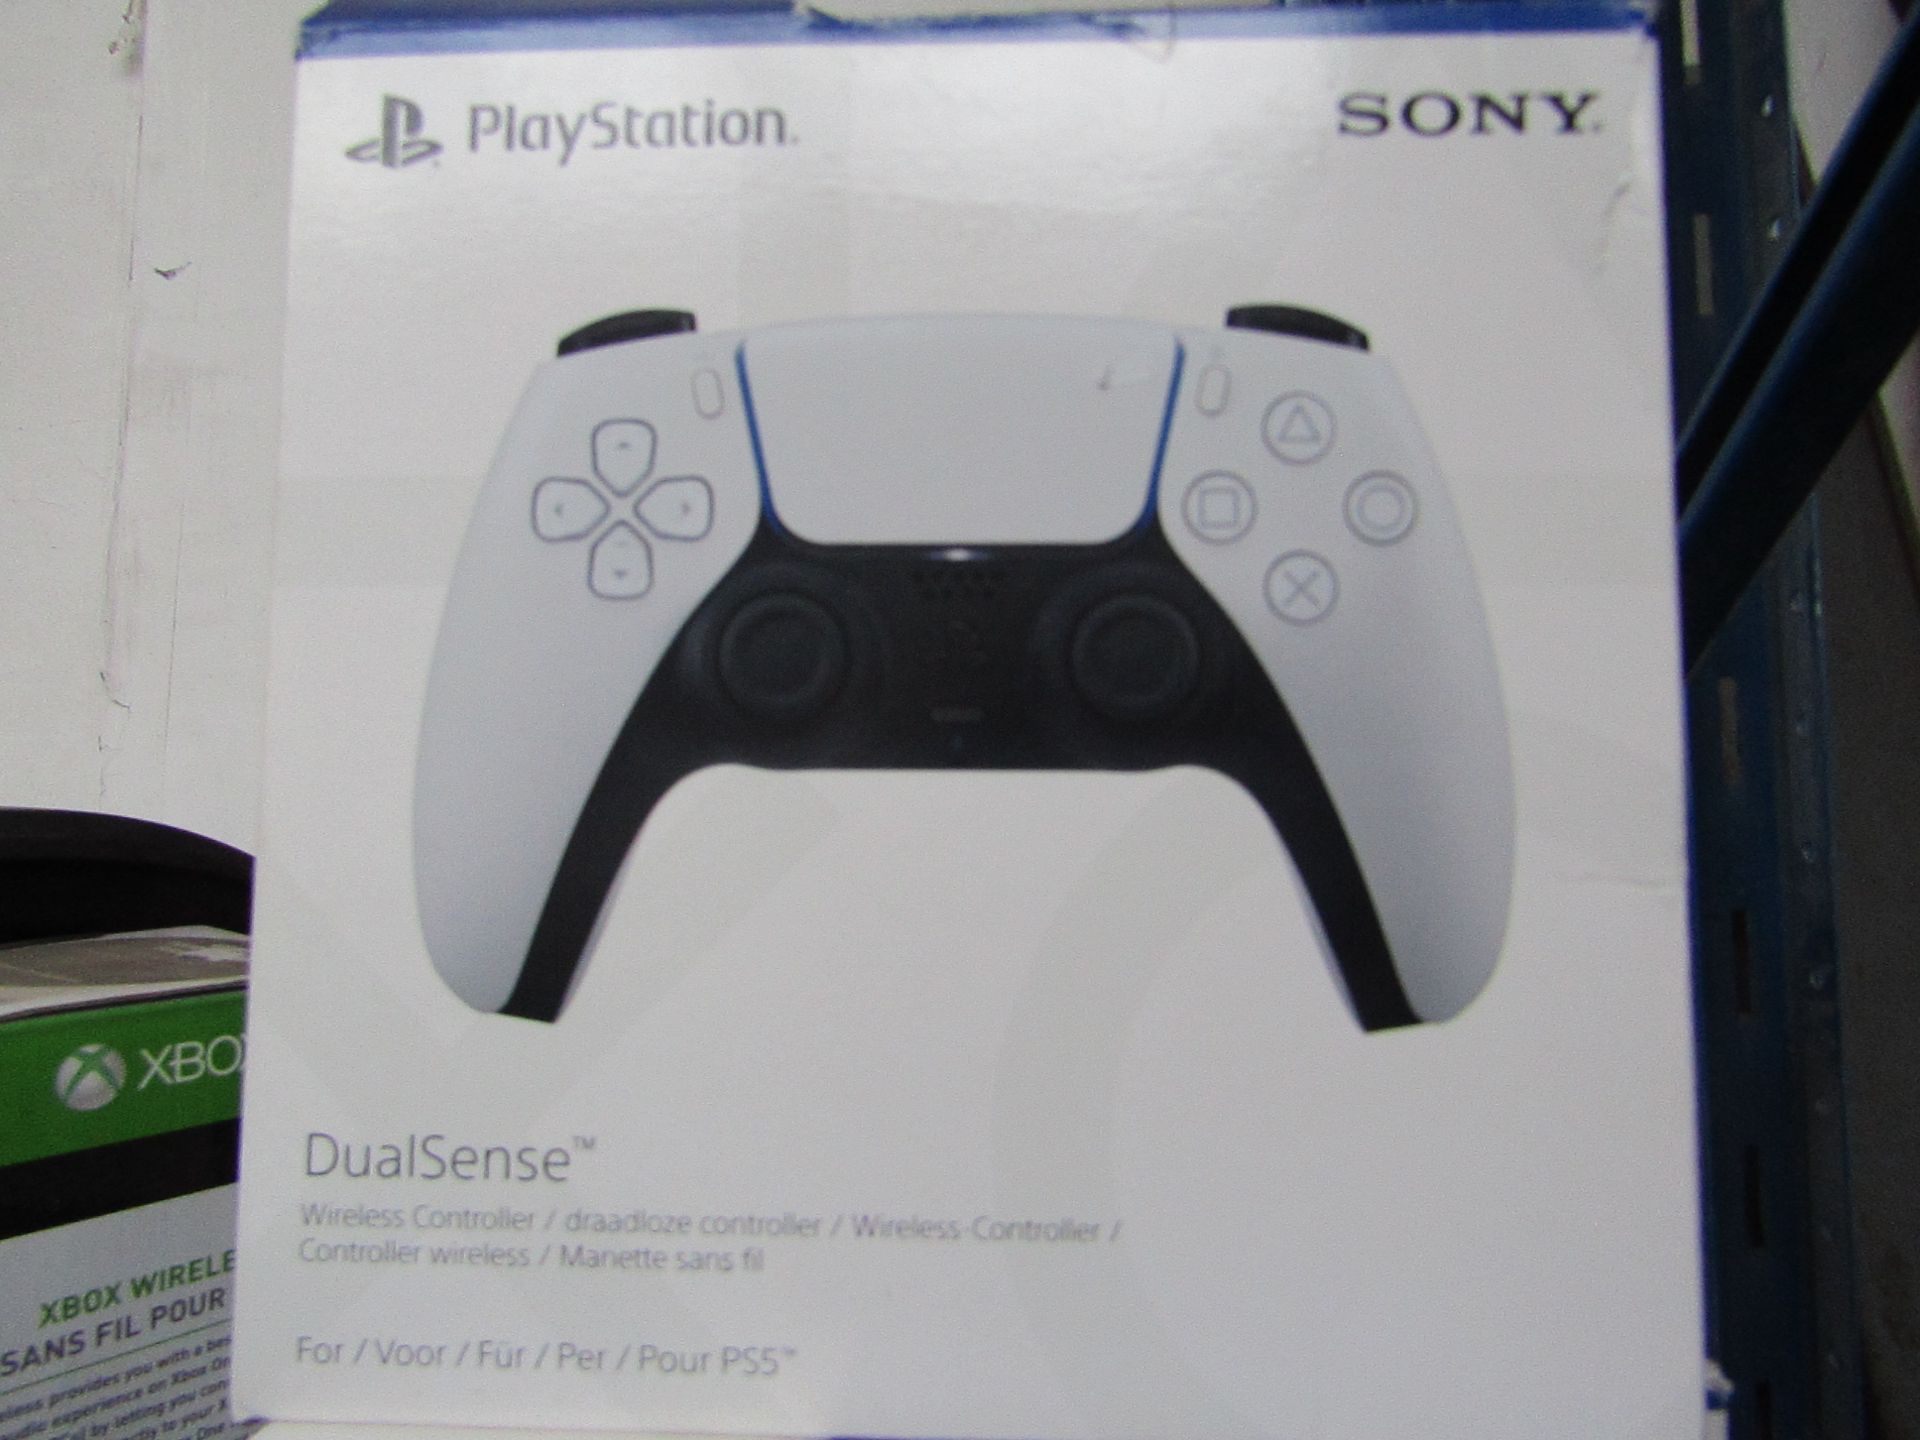 Play station 5 controller, working but has a loose button, in original box